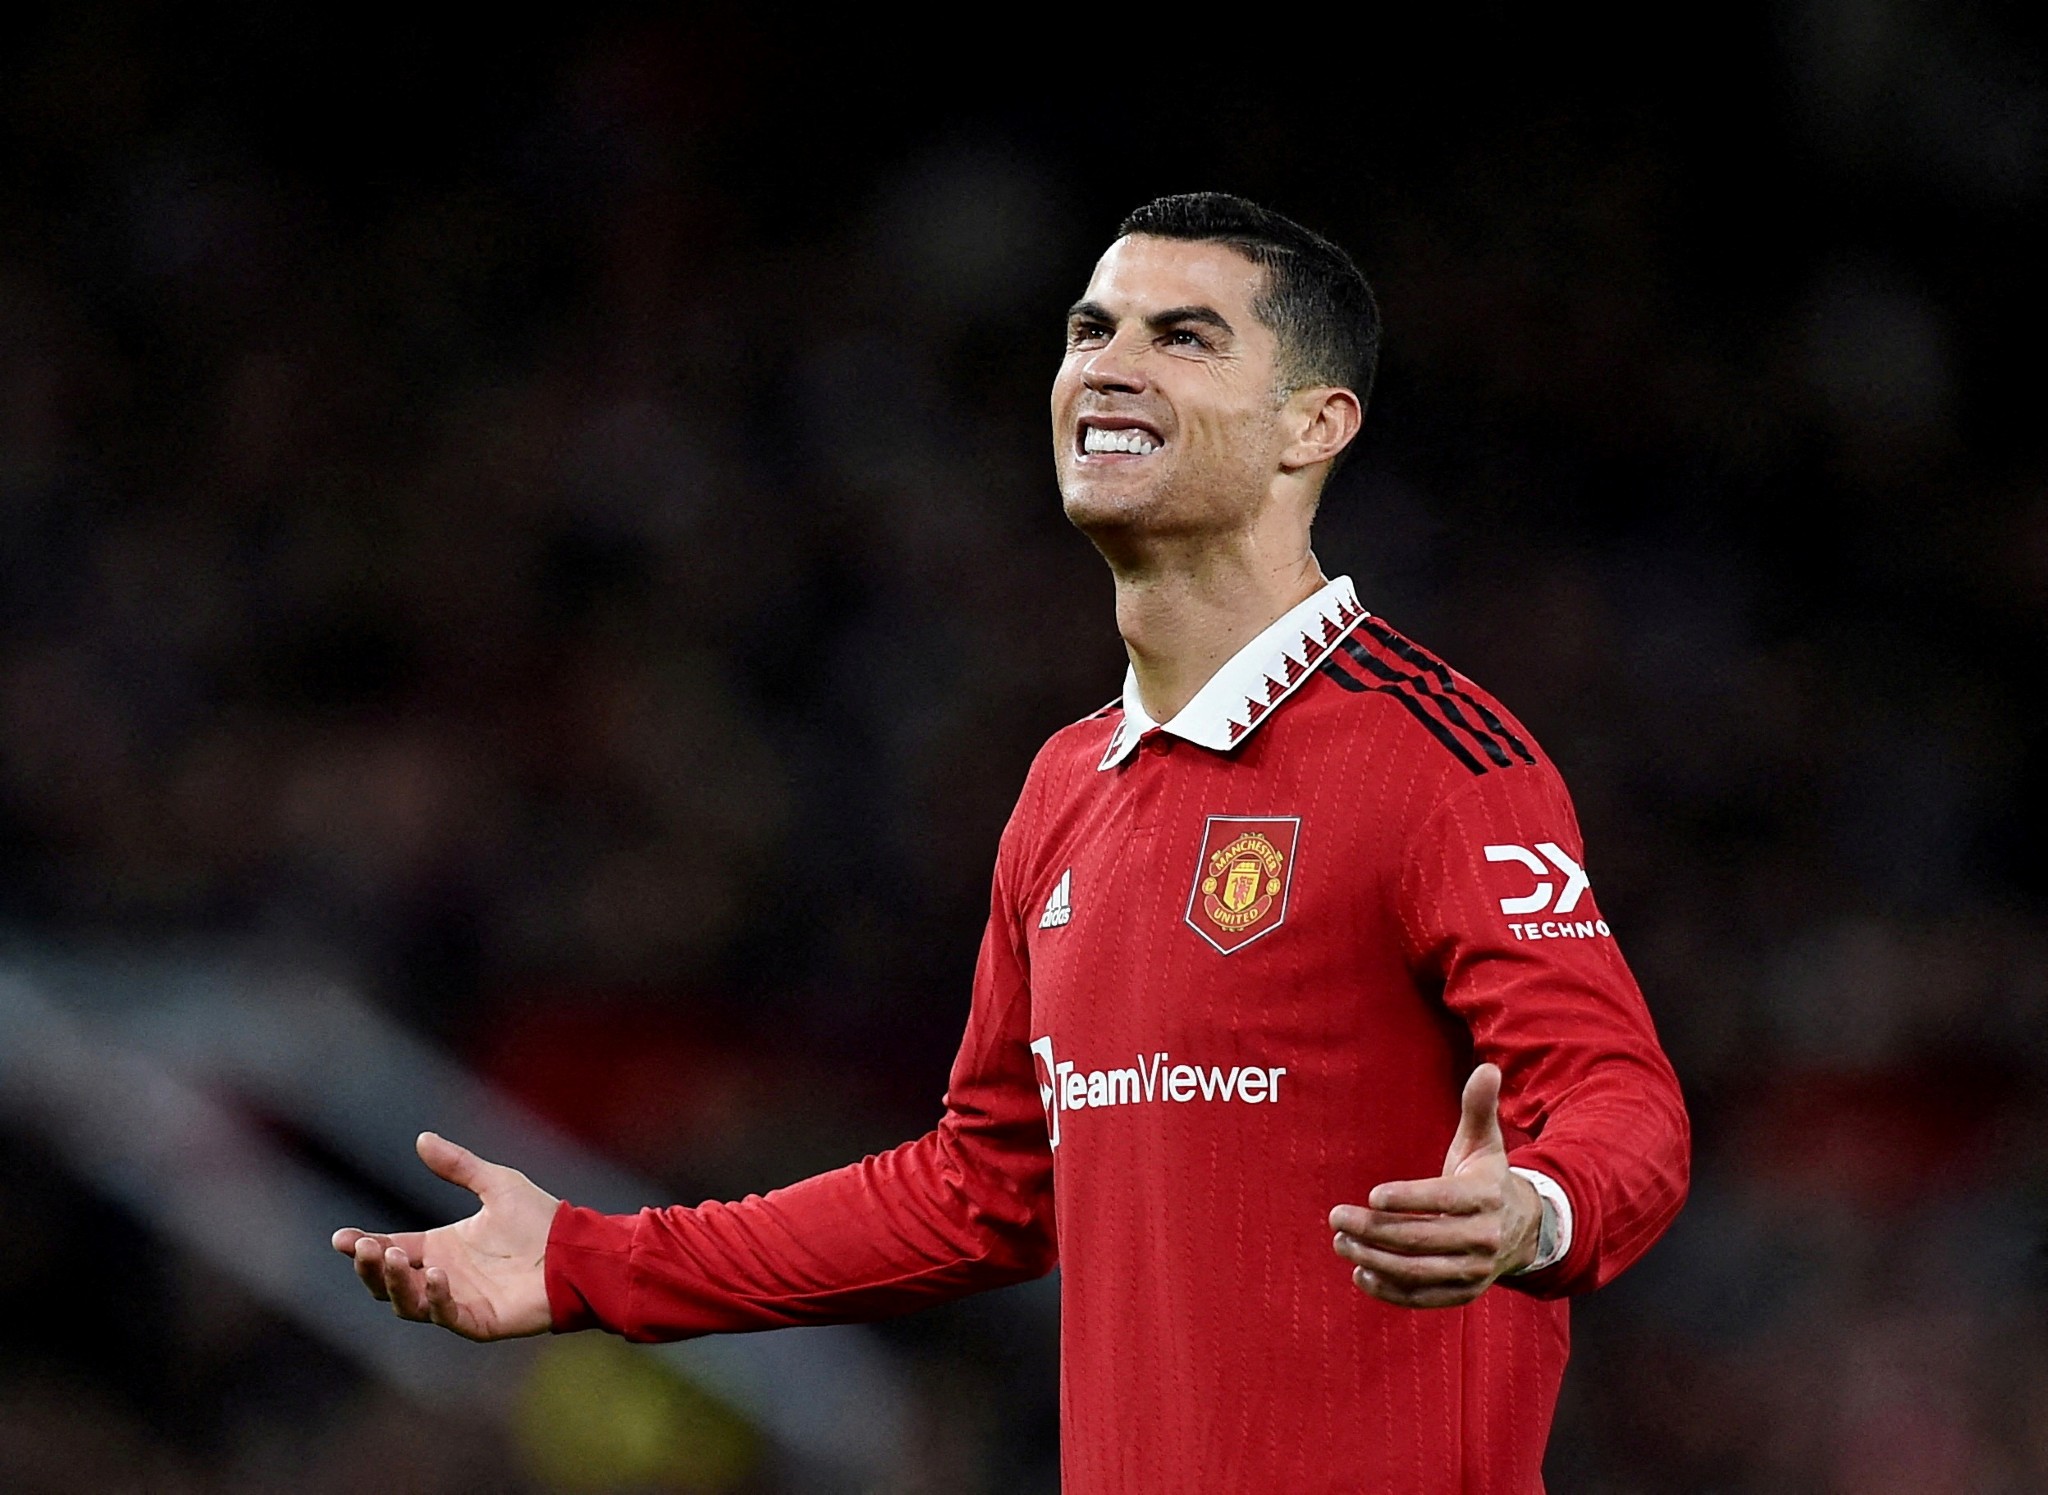 Ronaldo to leave Manchester United after criticising Club